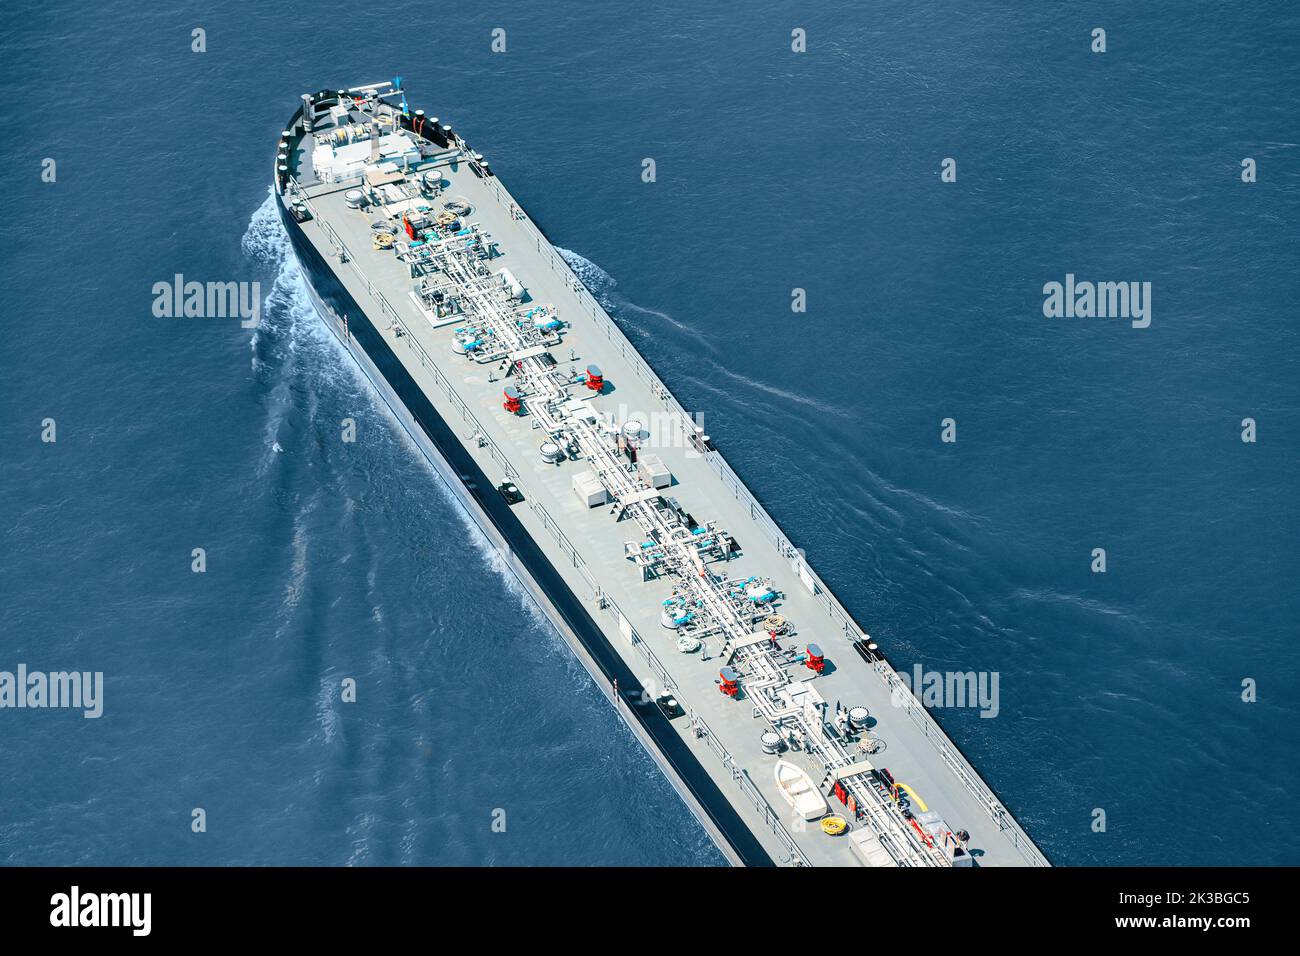 Aerial view of a large gas or oil tanker ship. Infrastructure and transportation of fuel and import of hydrocarbons Stock Photo